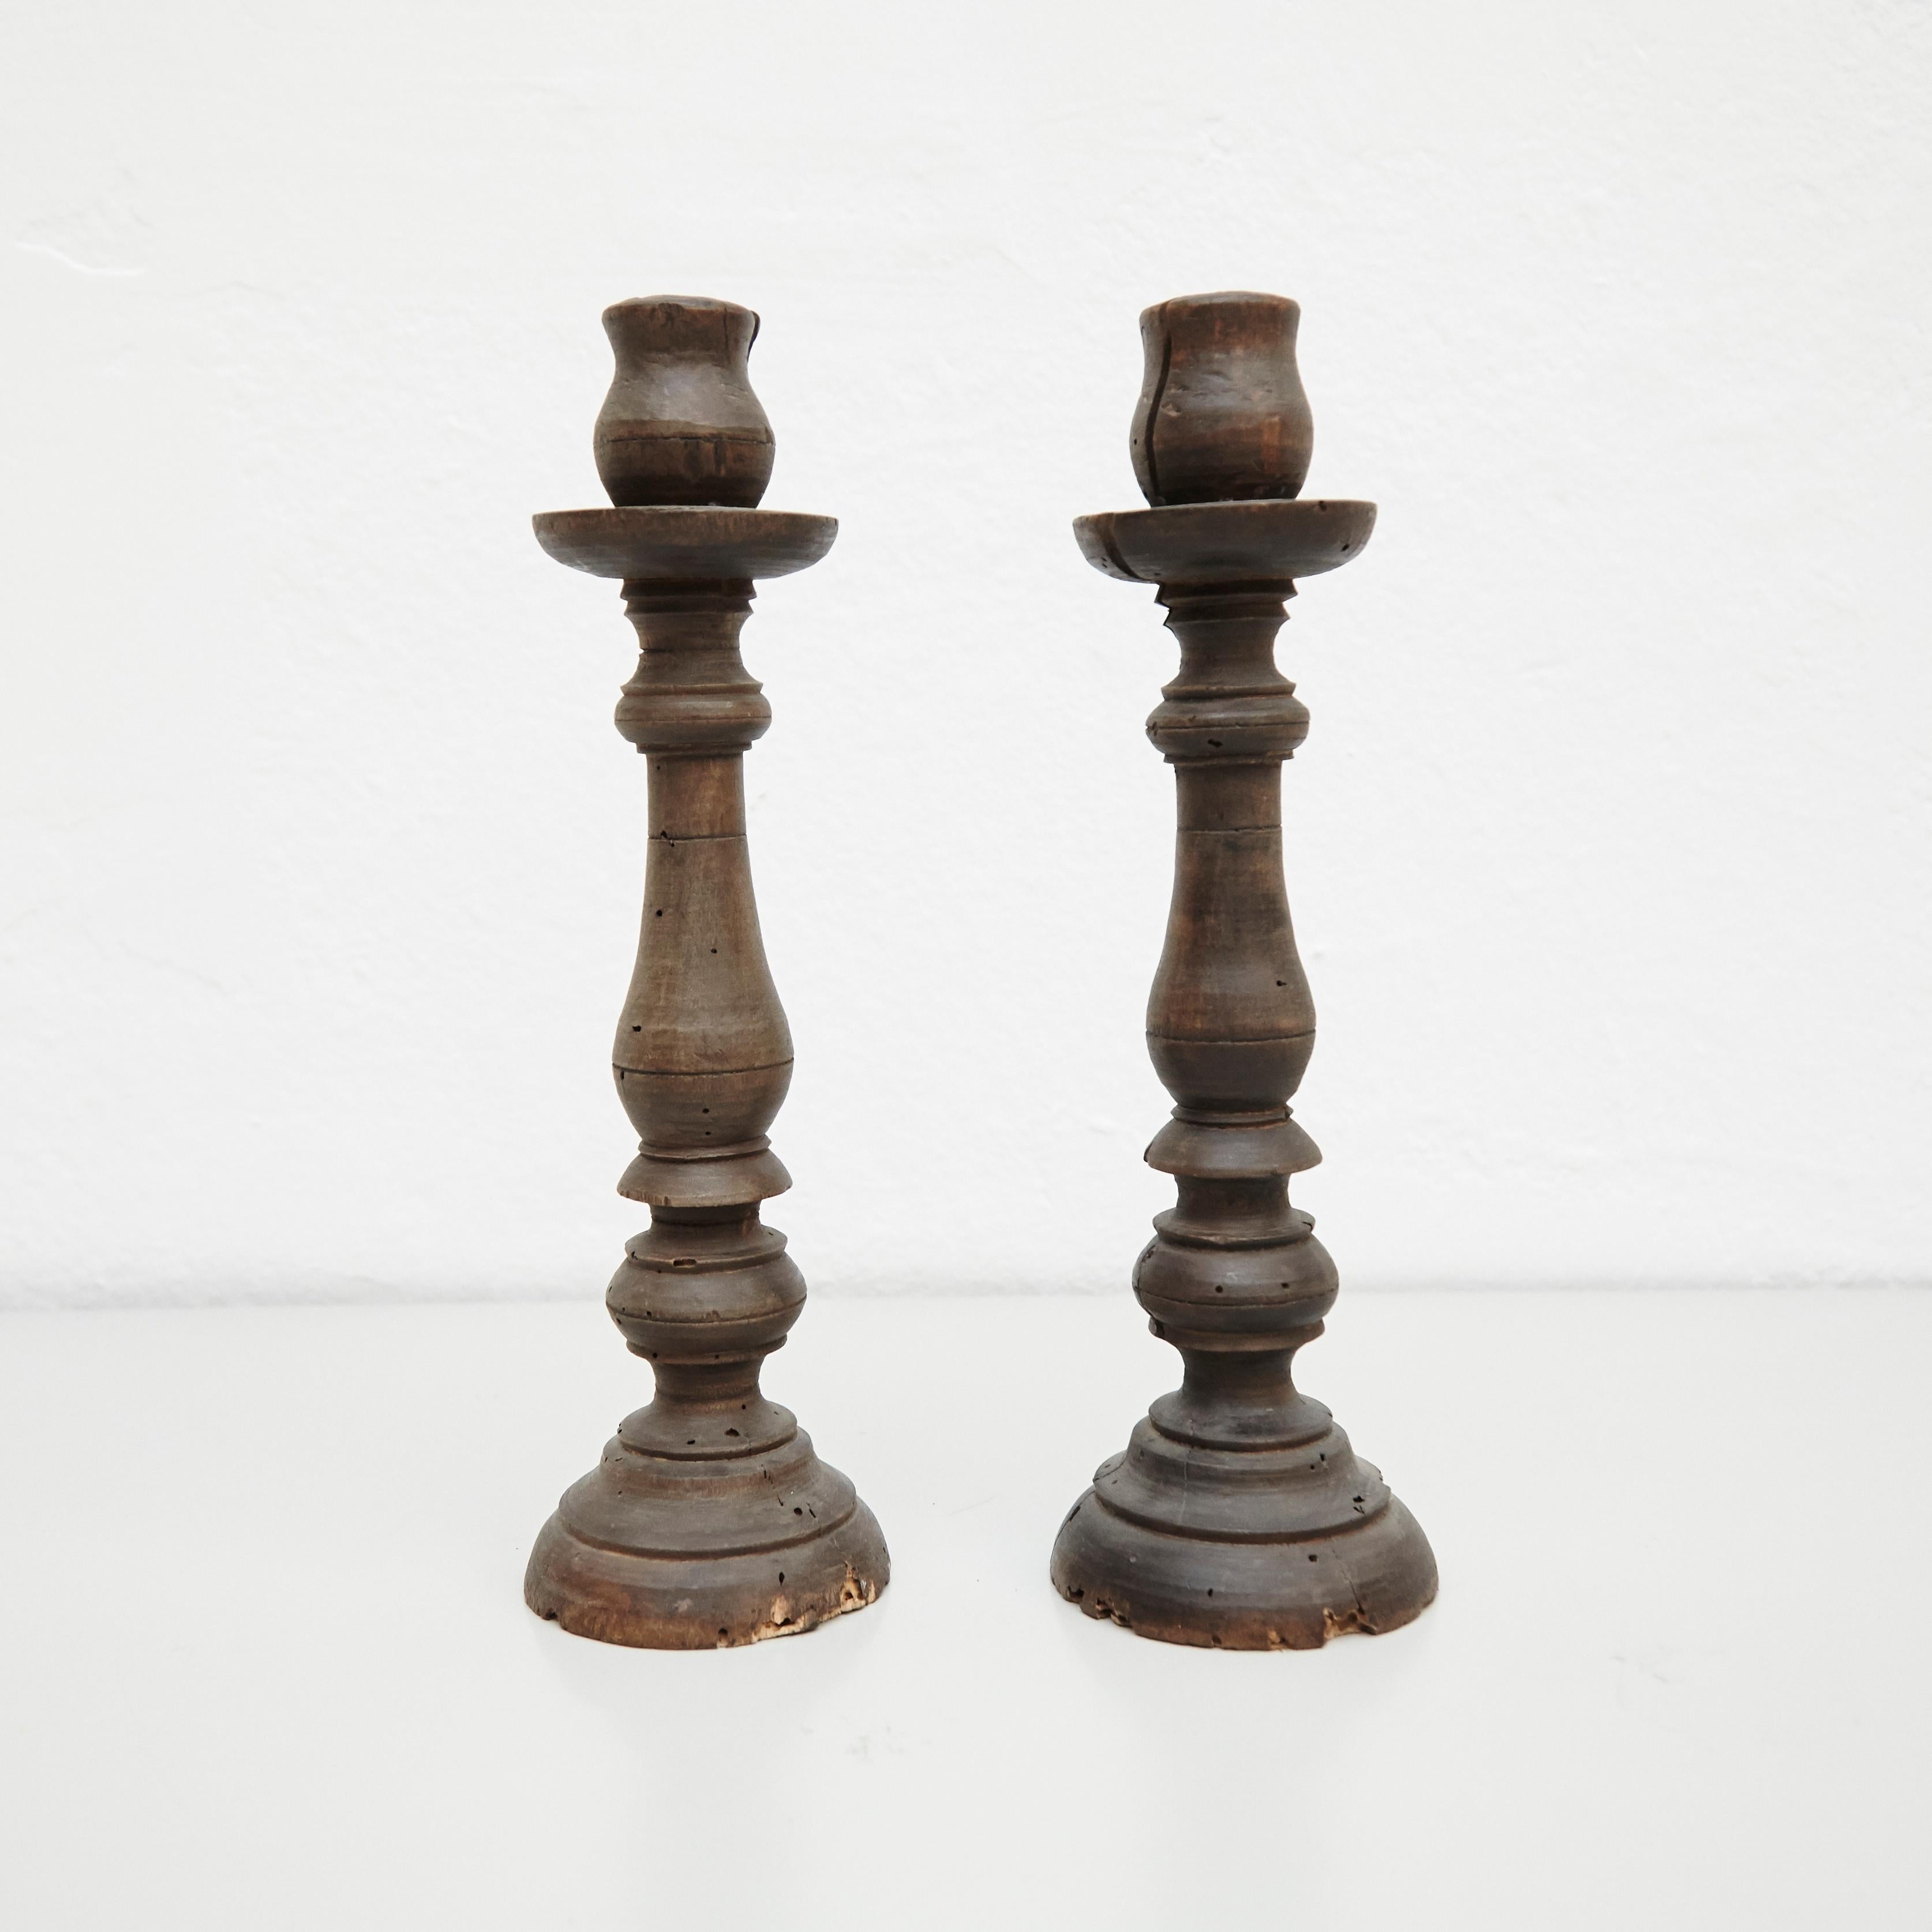 Mid-19th century pair of popular traditional rustic wood candlesticks.
By unknown manufacturer, France.

In original condition, with minor wear consistent with age and use, preserving a beautiful patina.

Materials:
Wood

Dimensions:
ø 10.5